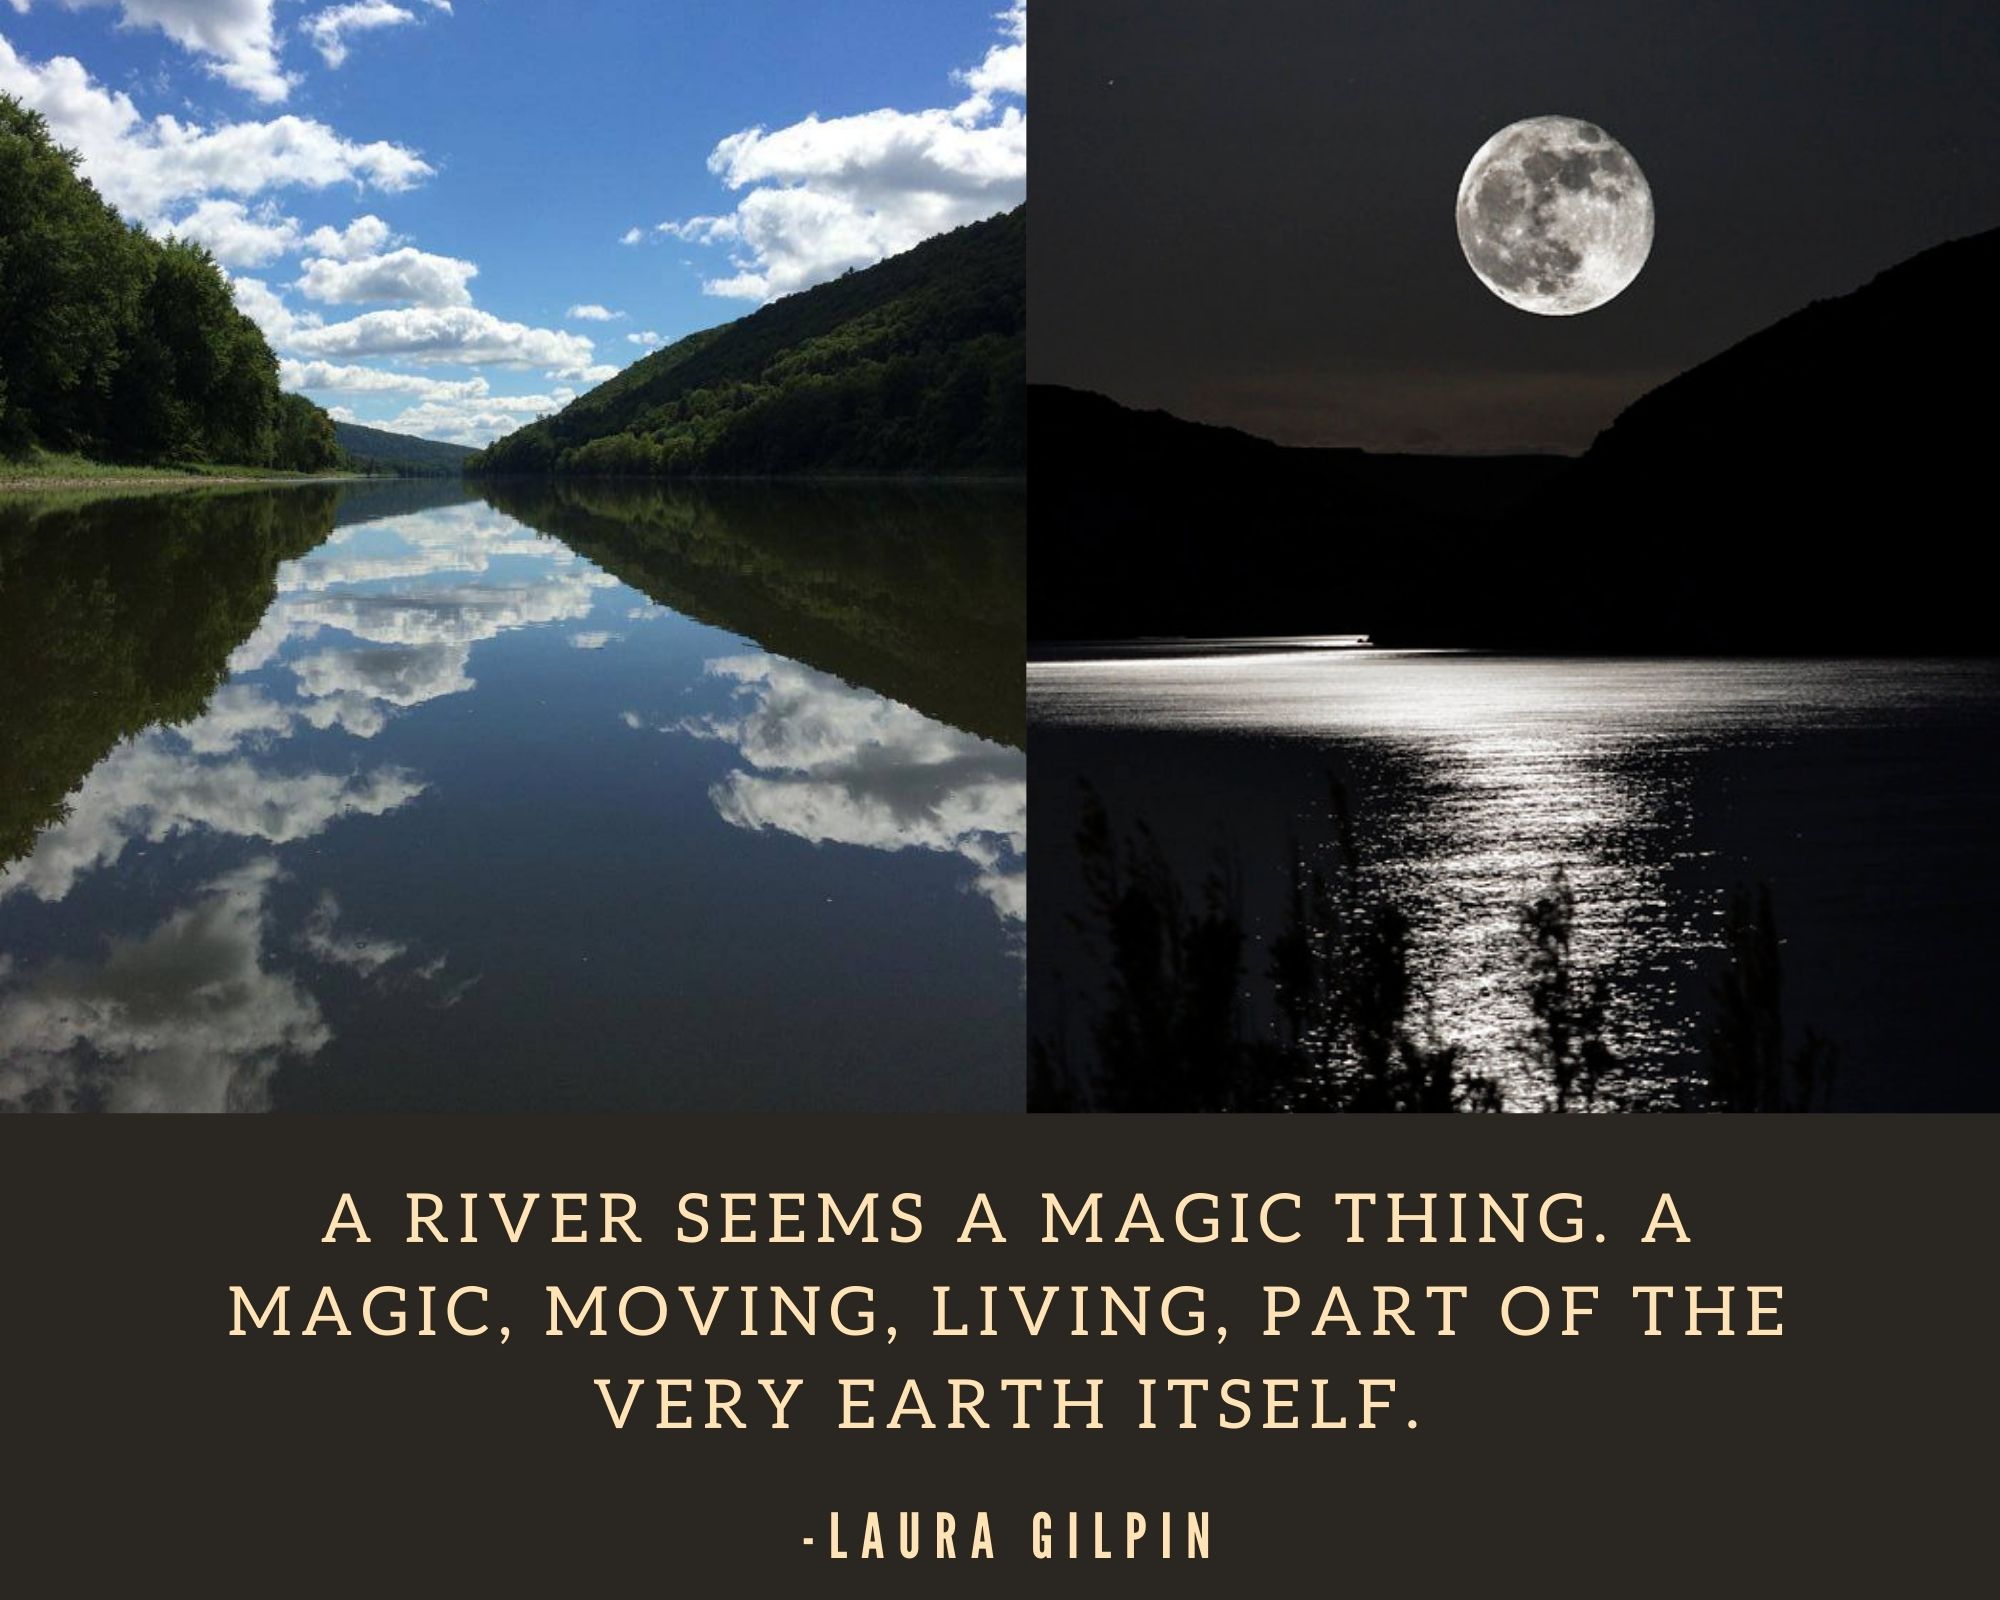 A river seems a magic thing. A magic, moving, living, part of the very earth itself.